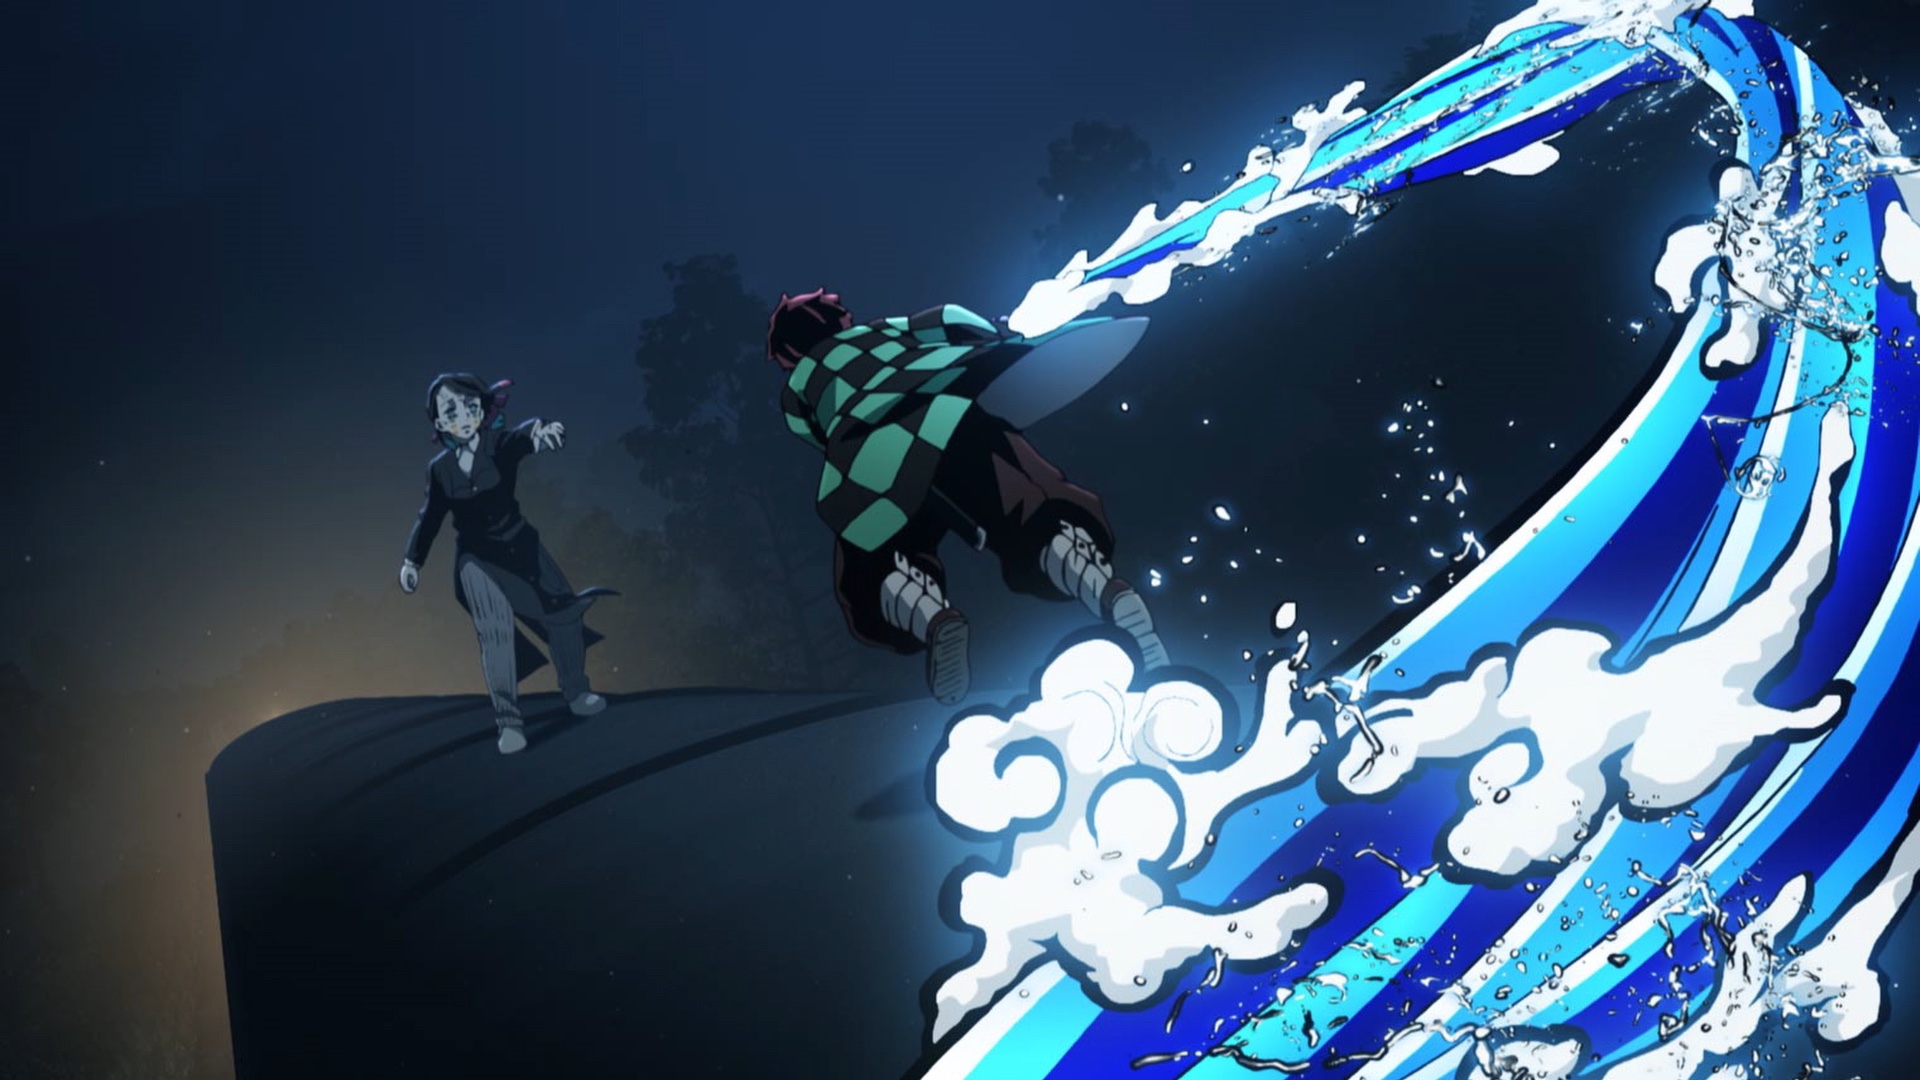 Demon Slayer's Mugen Train Arc Would Make for a Beautiful Video Game  Setpiece